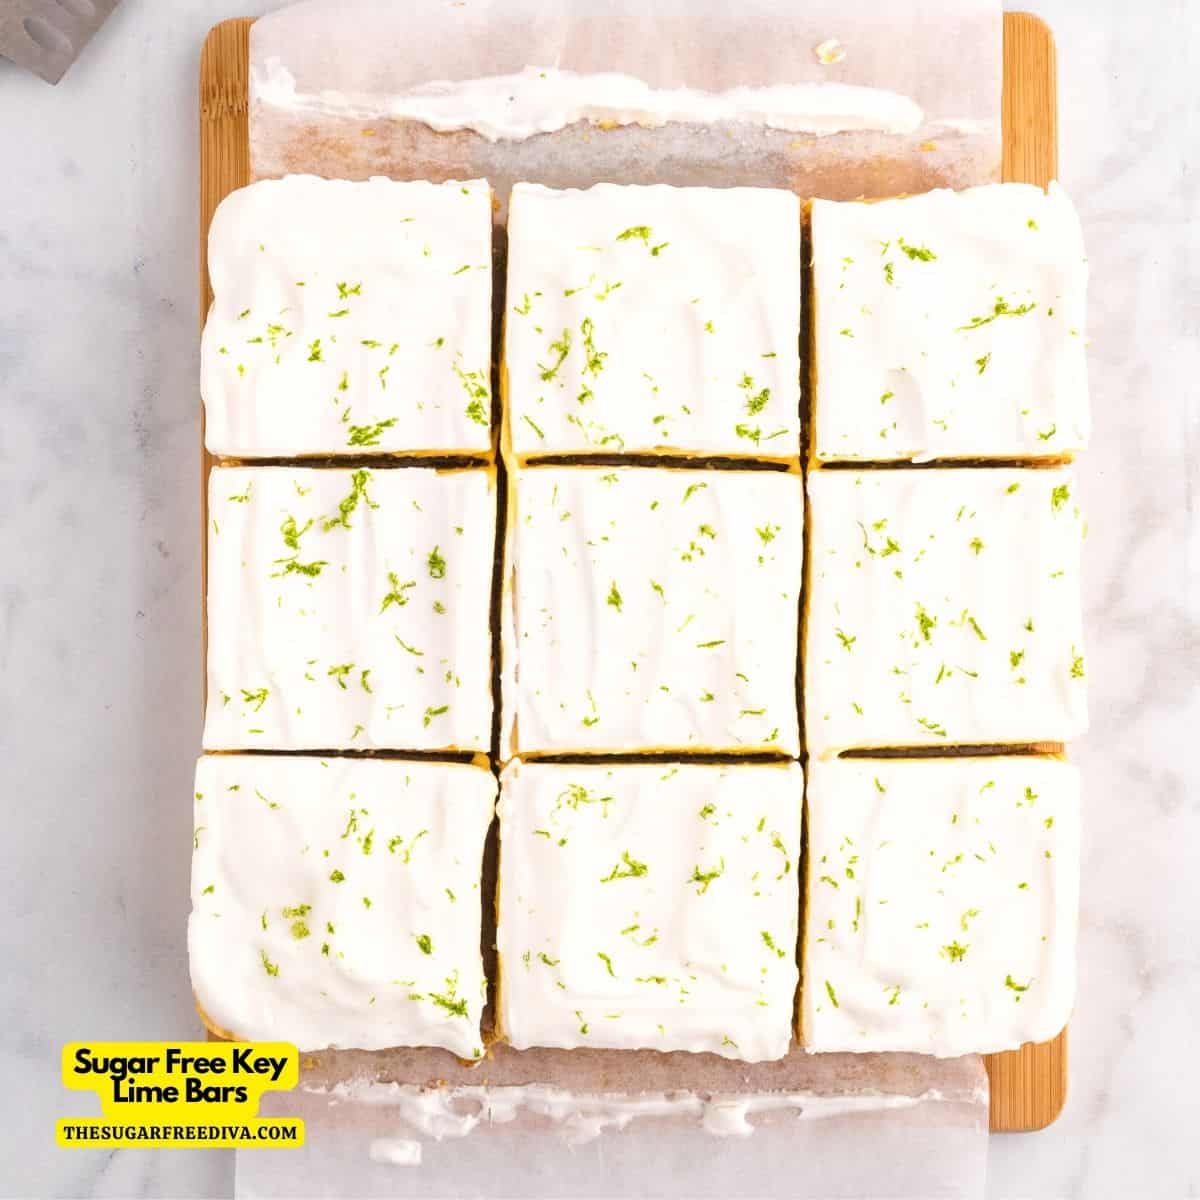 Sugar Free Key Lime Bars, a delicious layered dessert recipe made with a creamy tart filling on a buttery crust with no added sugar.